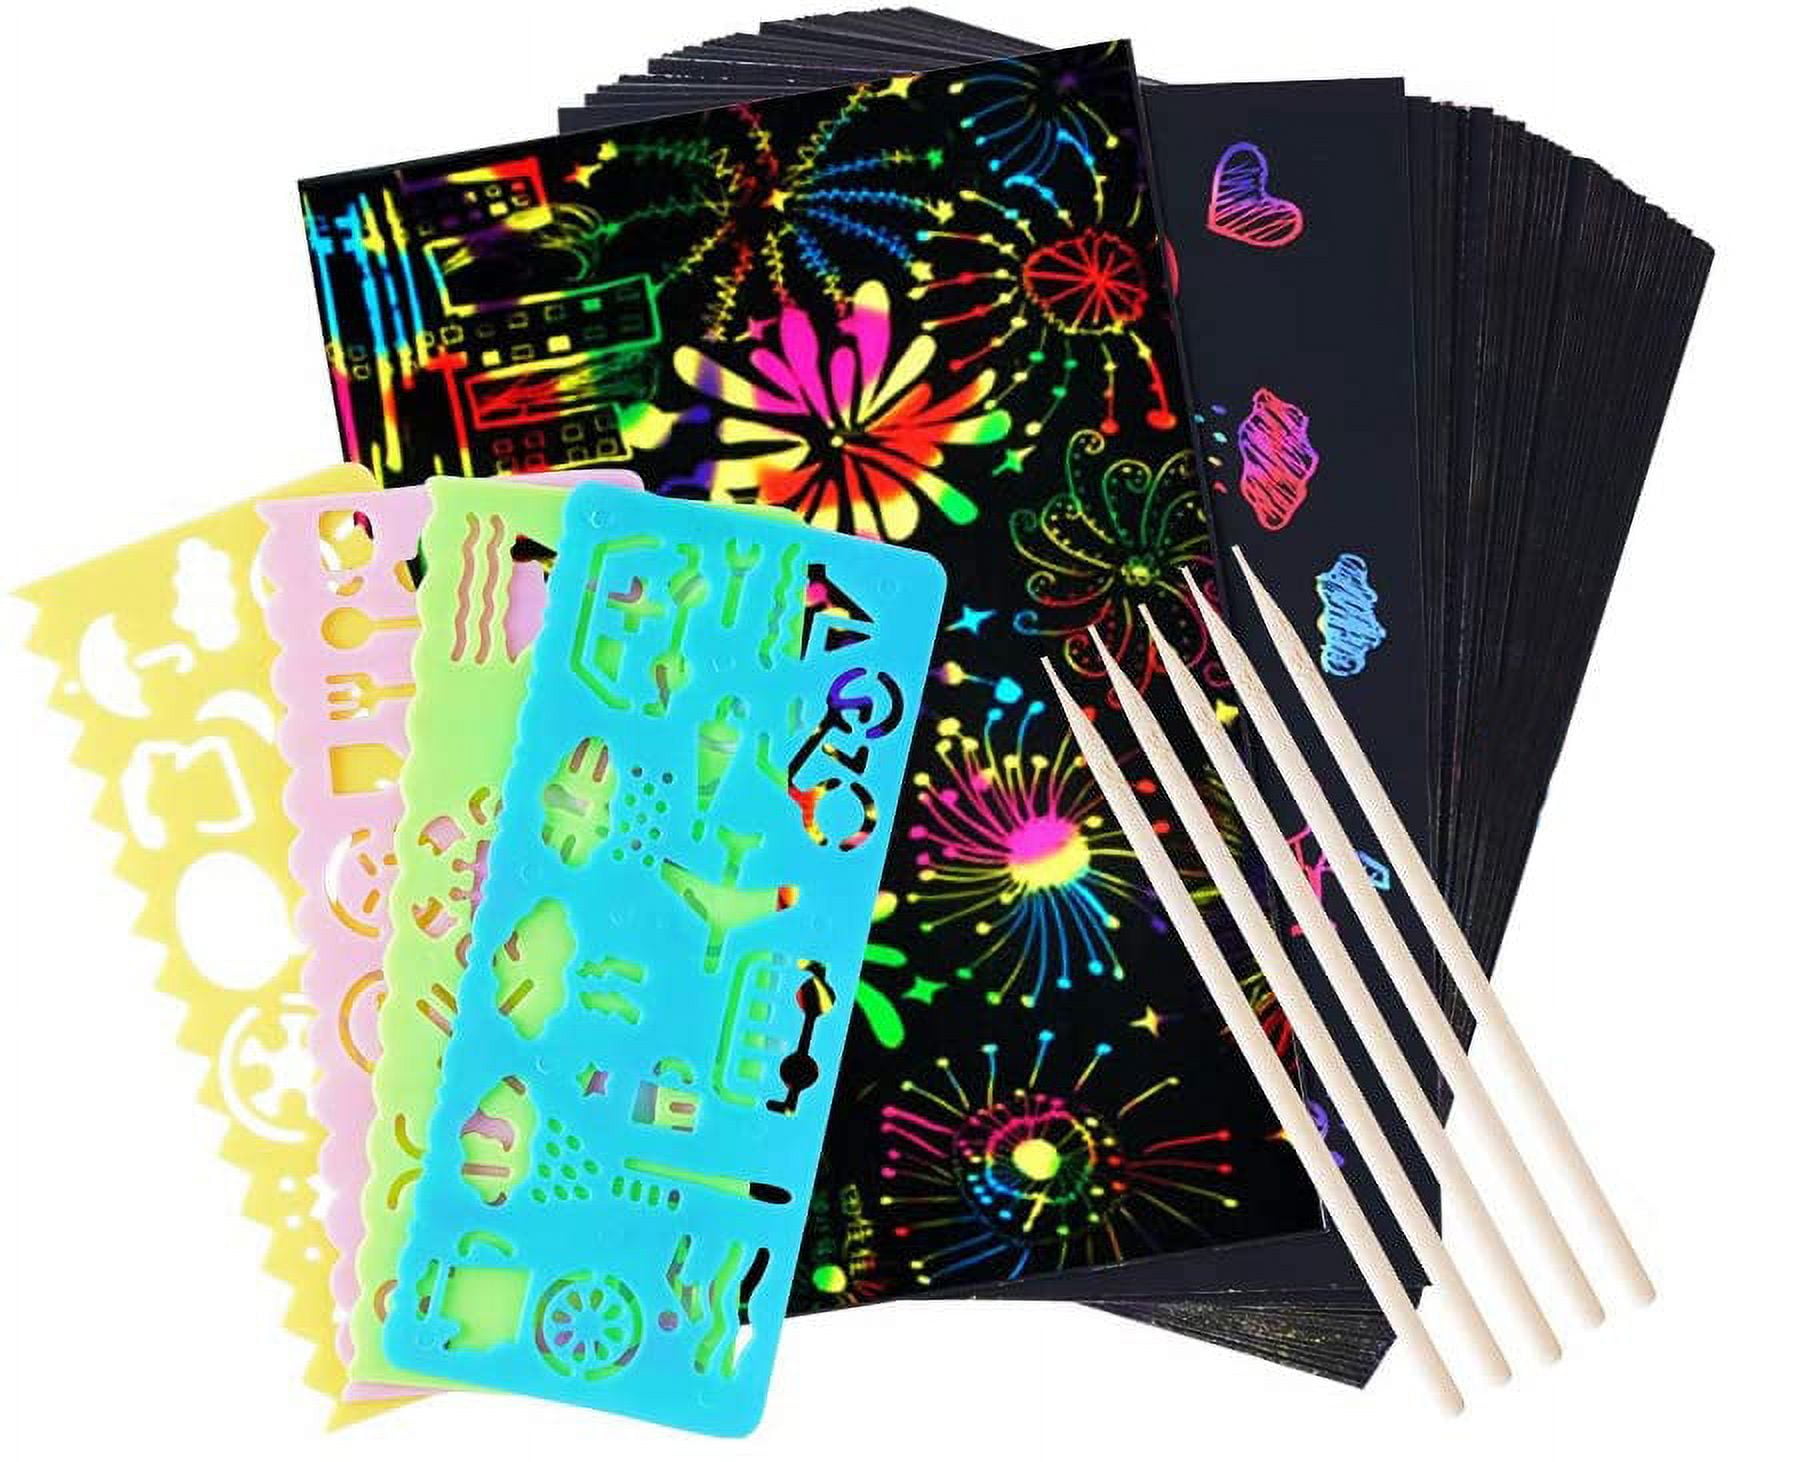 50Pcs Rainbow Scratch Paper for Kids, Bomutovy Art Crafts Set for Girl,  Scratch Paper Art Supplies Kits for Boy (Wooden Stylus, Stencils), Black  Card, Birthday, Christmas Gift 